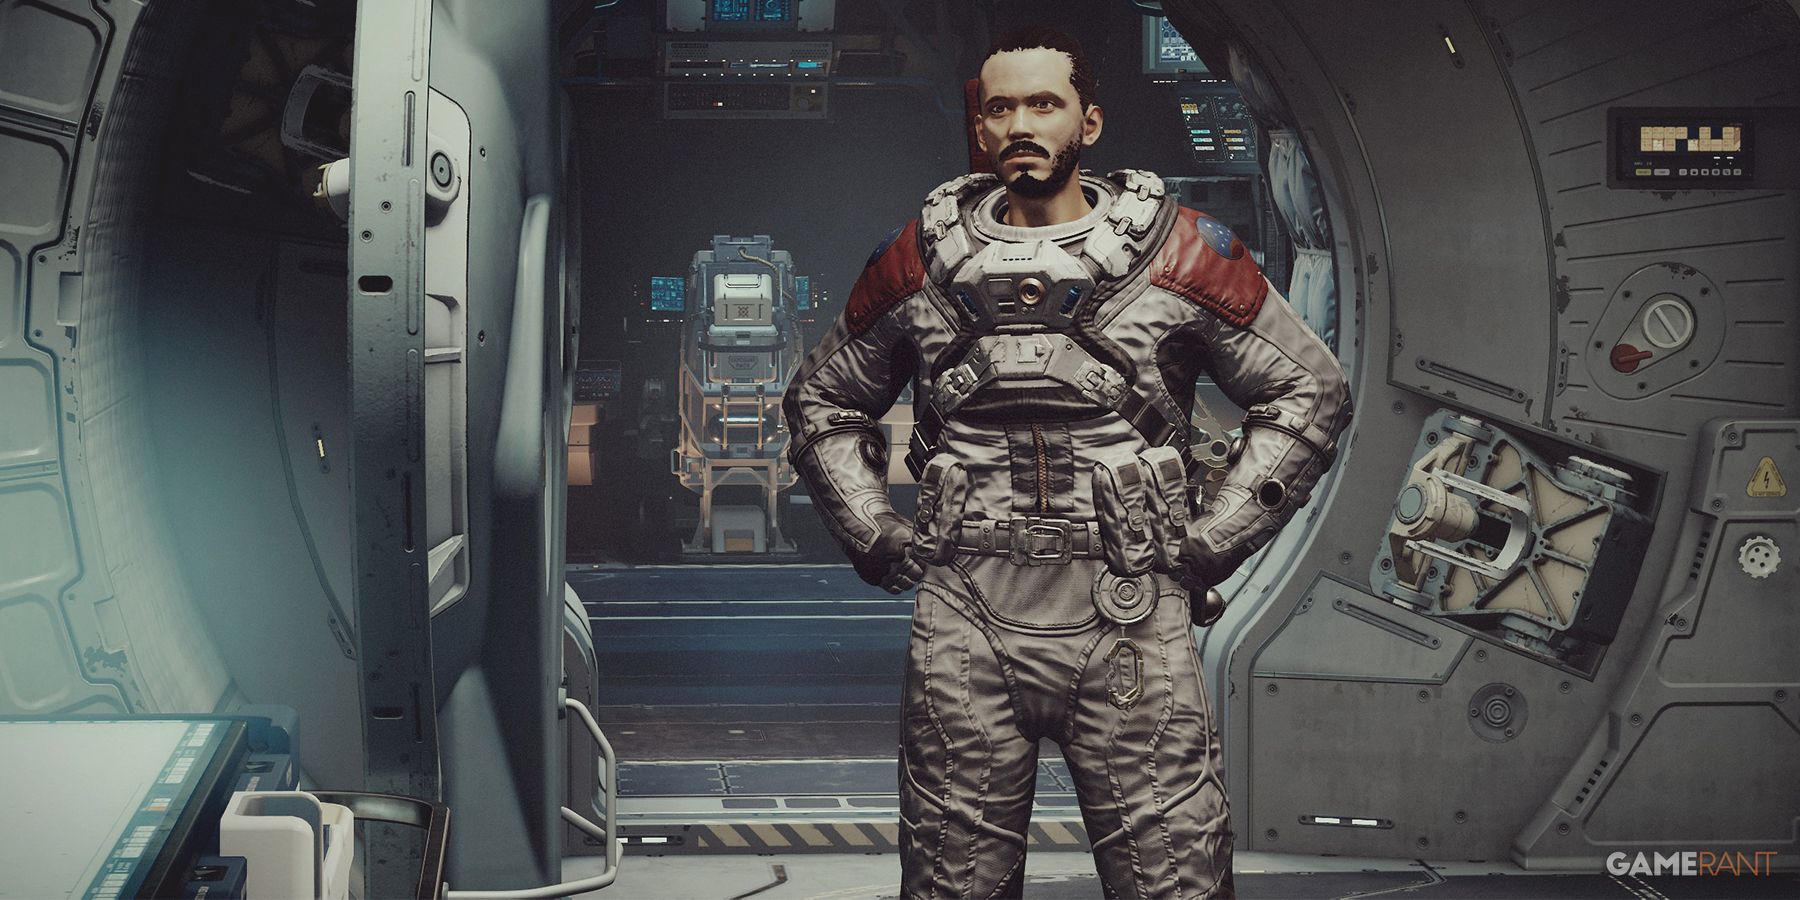 Starfield protagonist in space suit with hands on hips inside ship